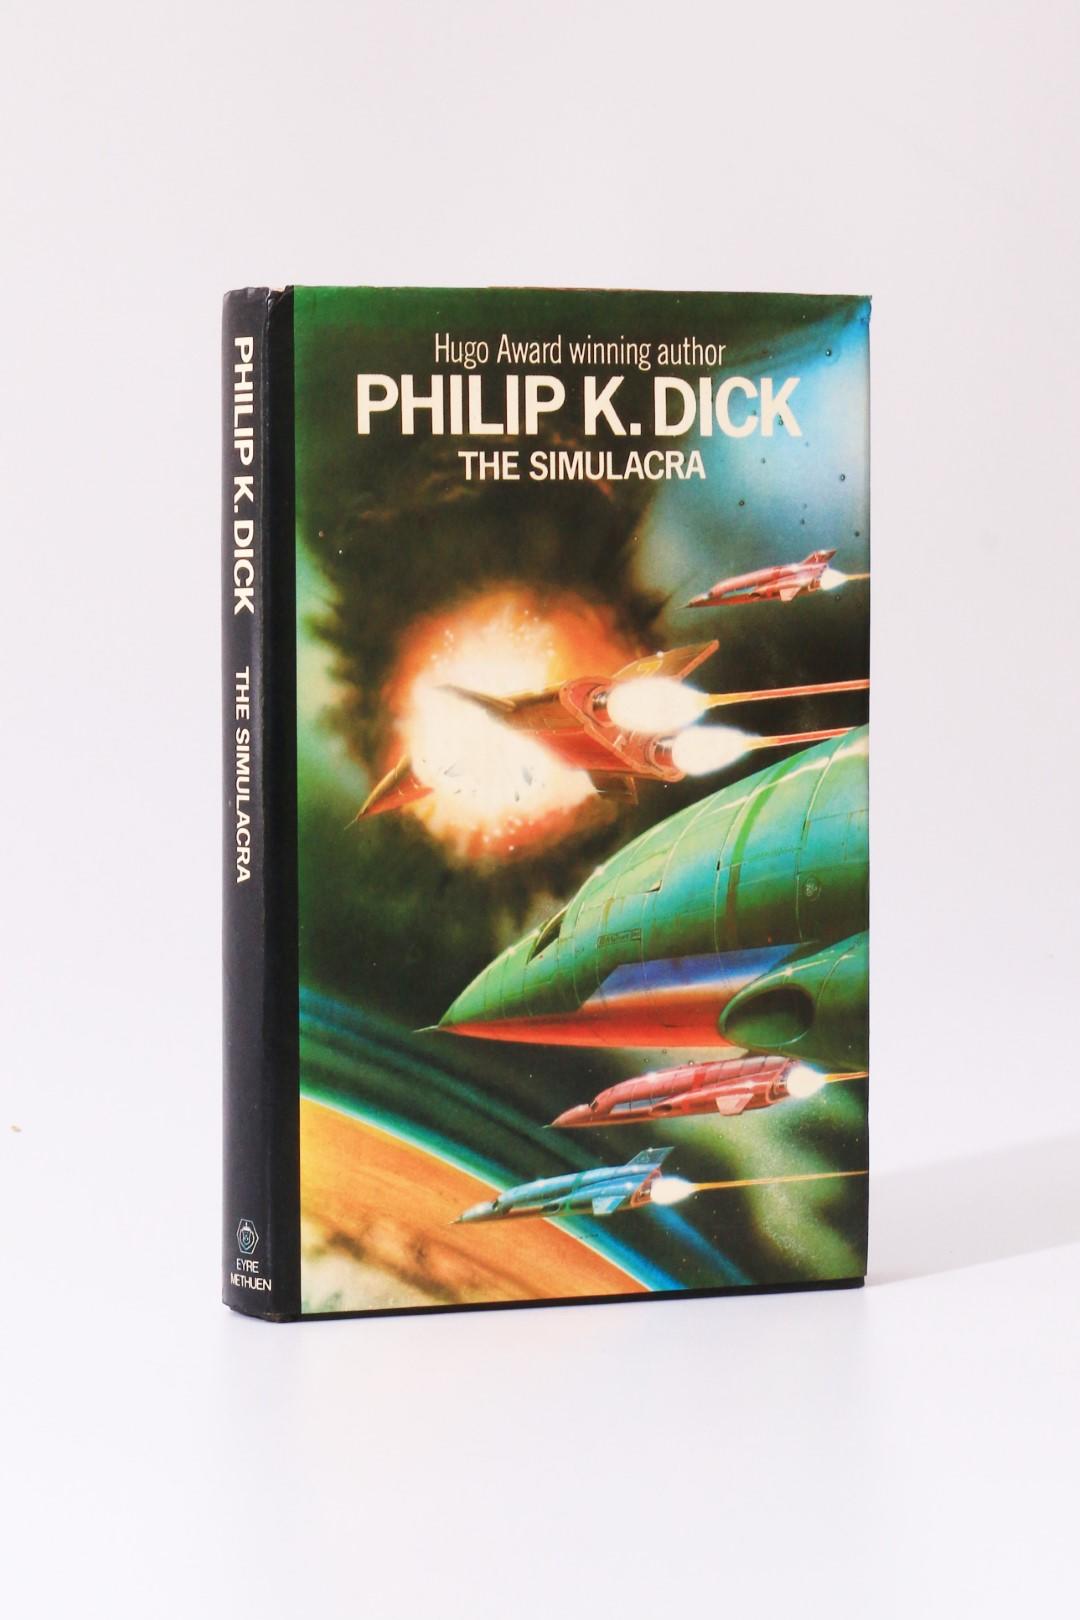 Philip K. Dick - The Simulacra - Eyre Methuen, 1977, First Edition.